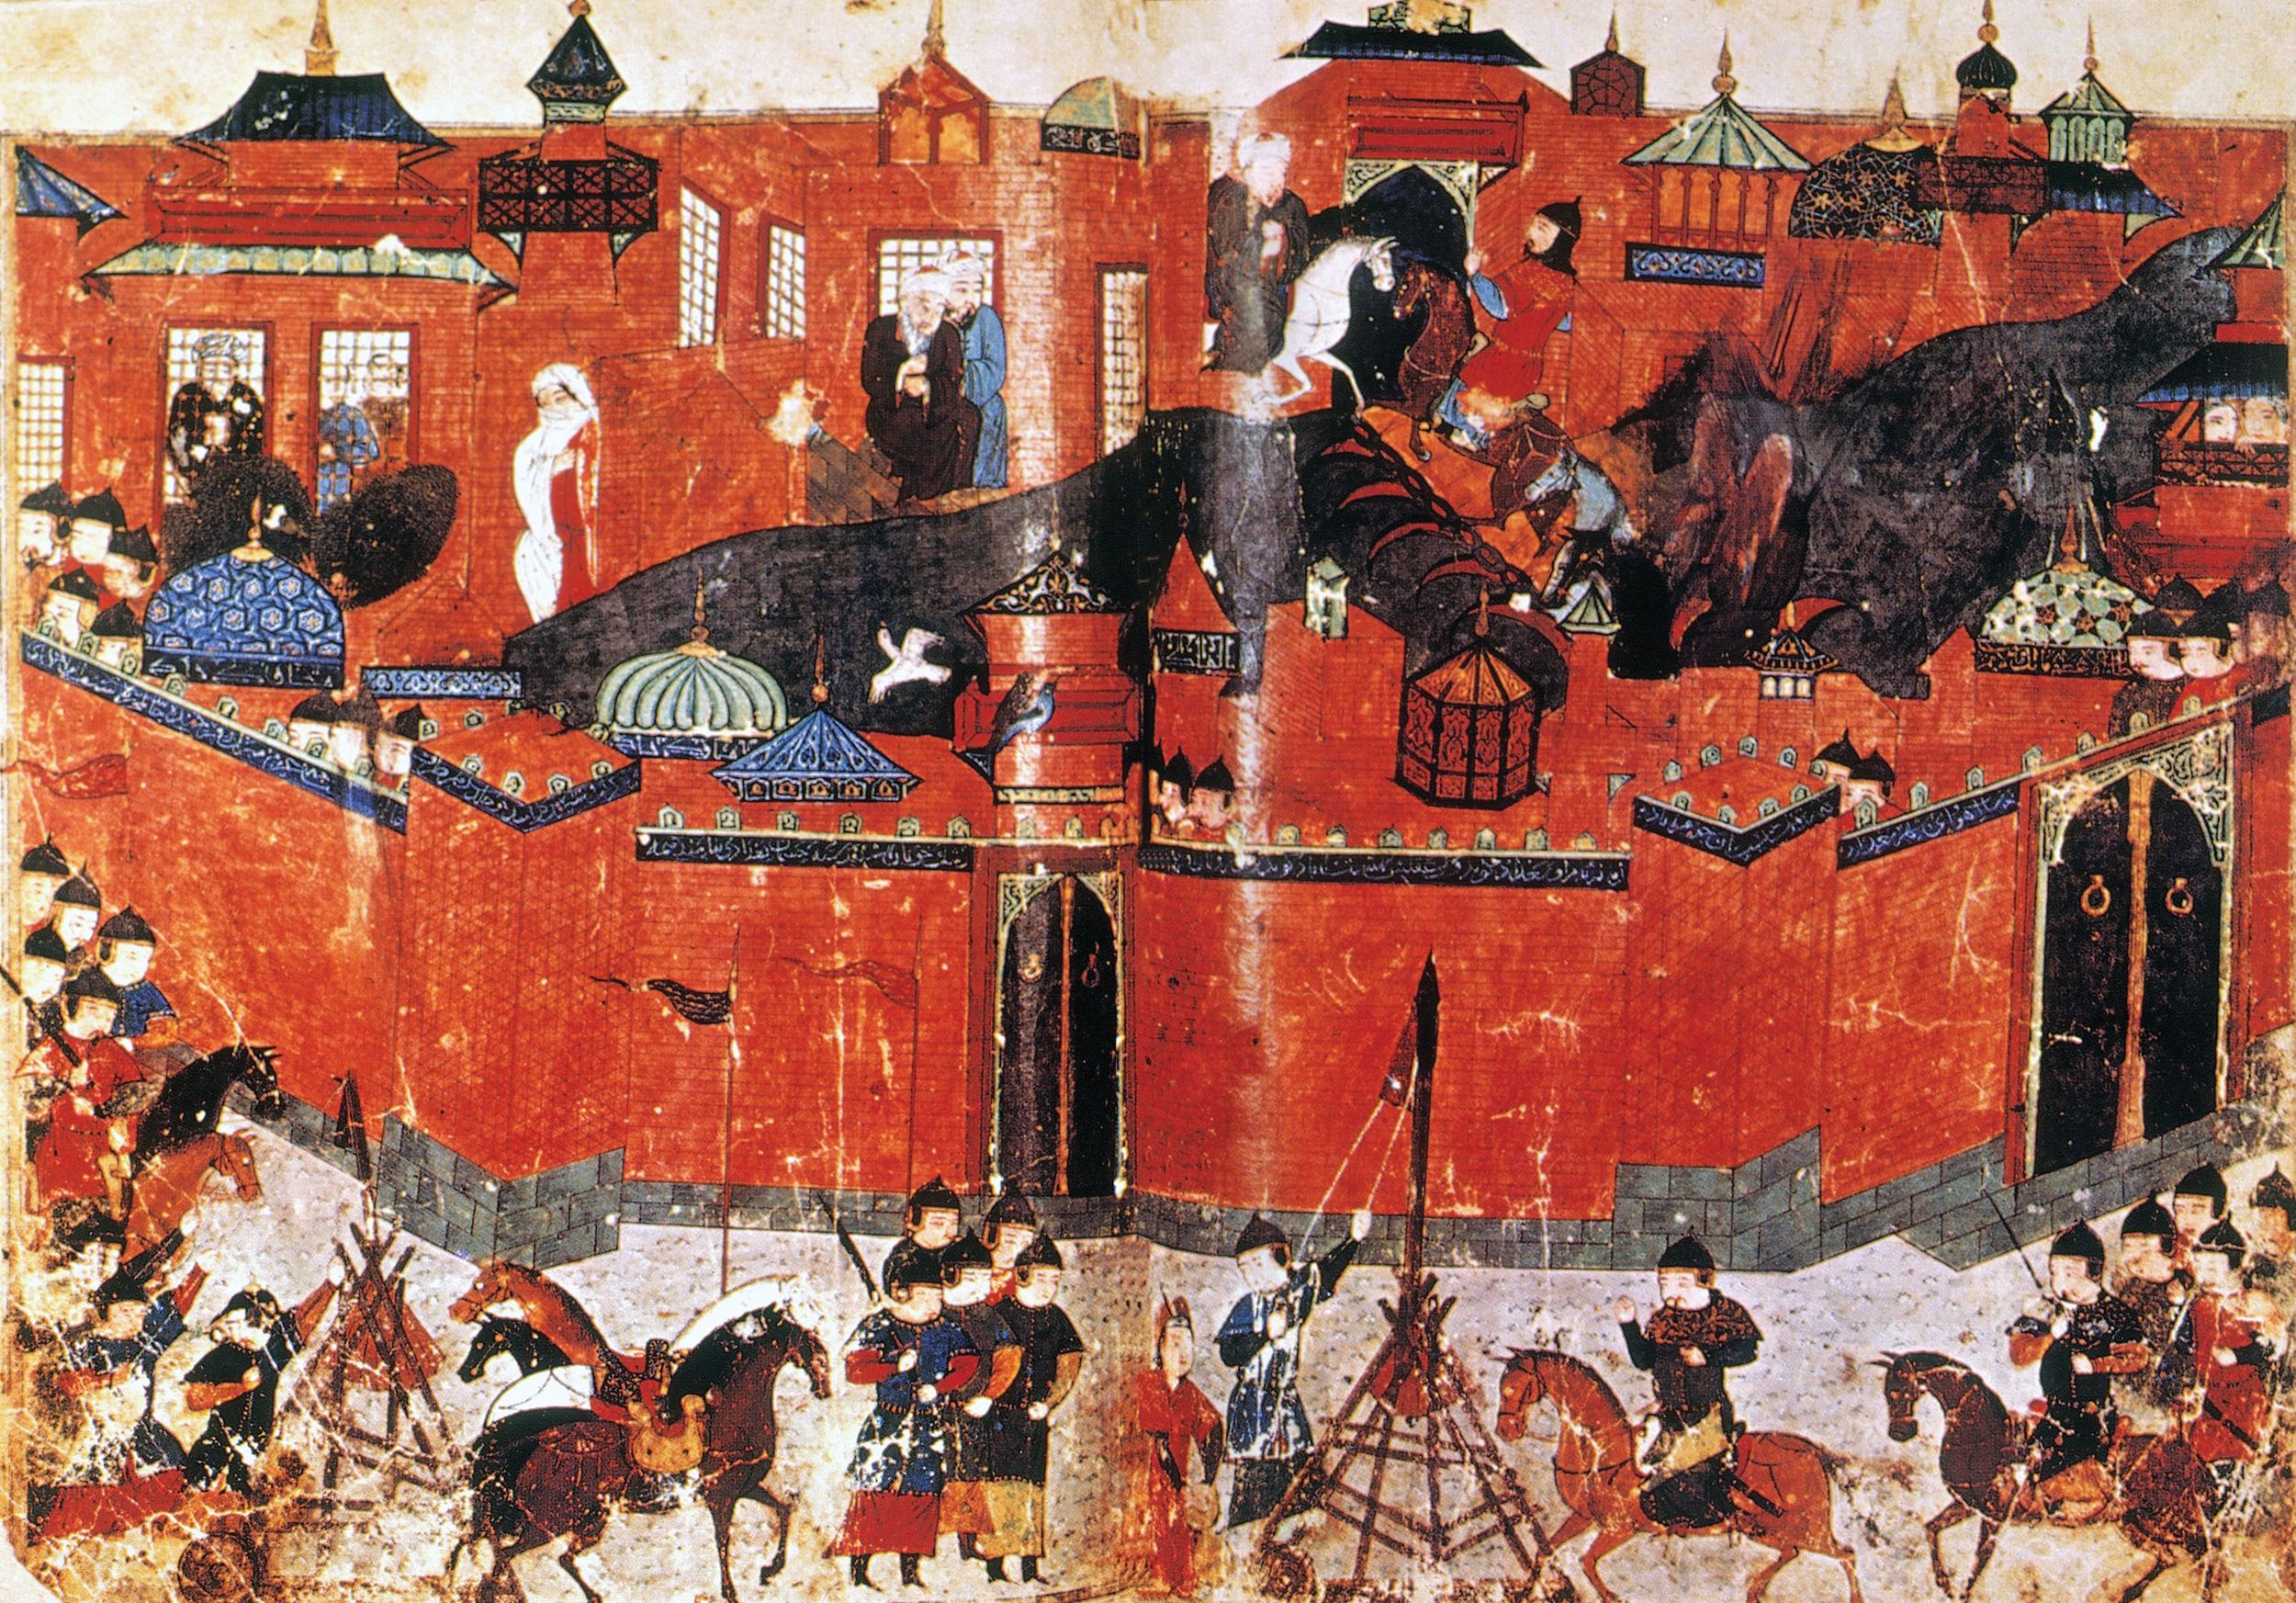 Mongols under Hulagu Khan turned their attentions west to besiege Baghdad in February 1258, overrunning the city and trampling to death Caliph Mustasim, the Muslim ruler. 